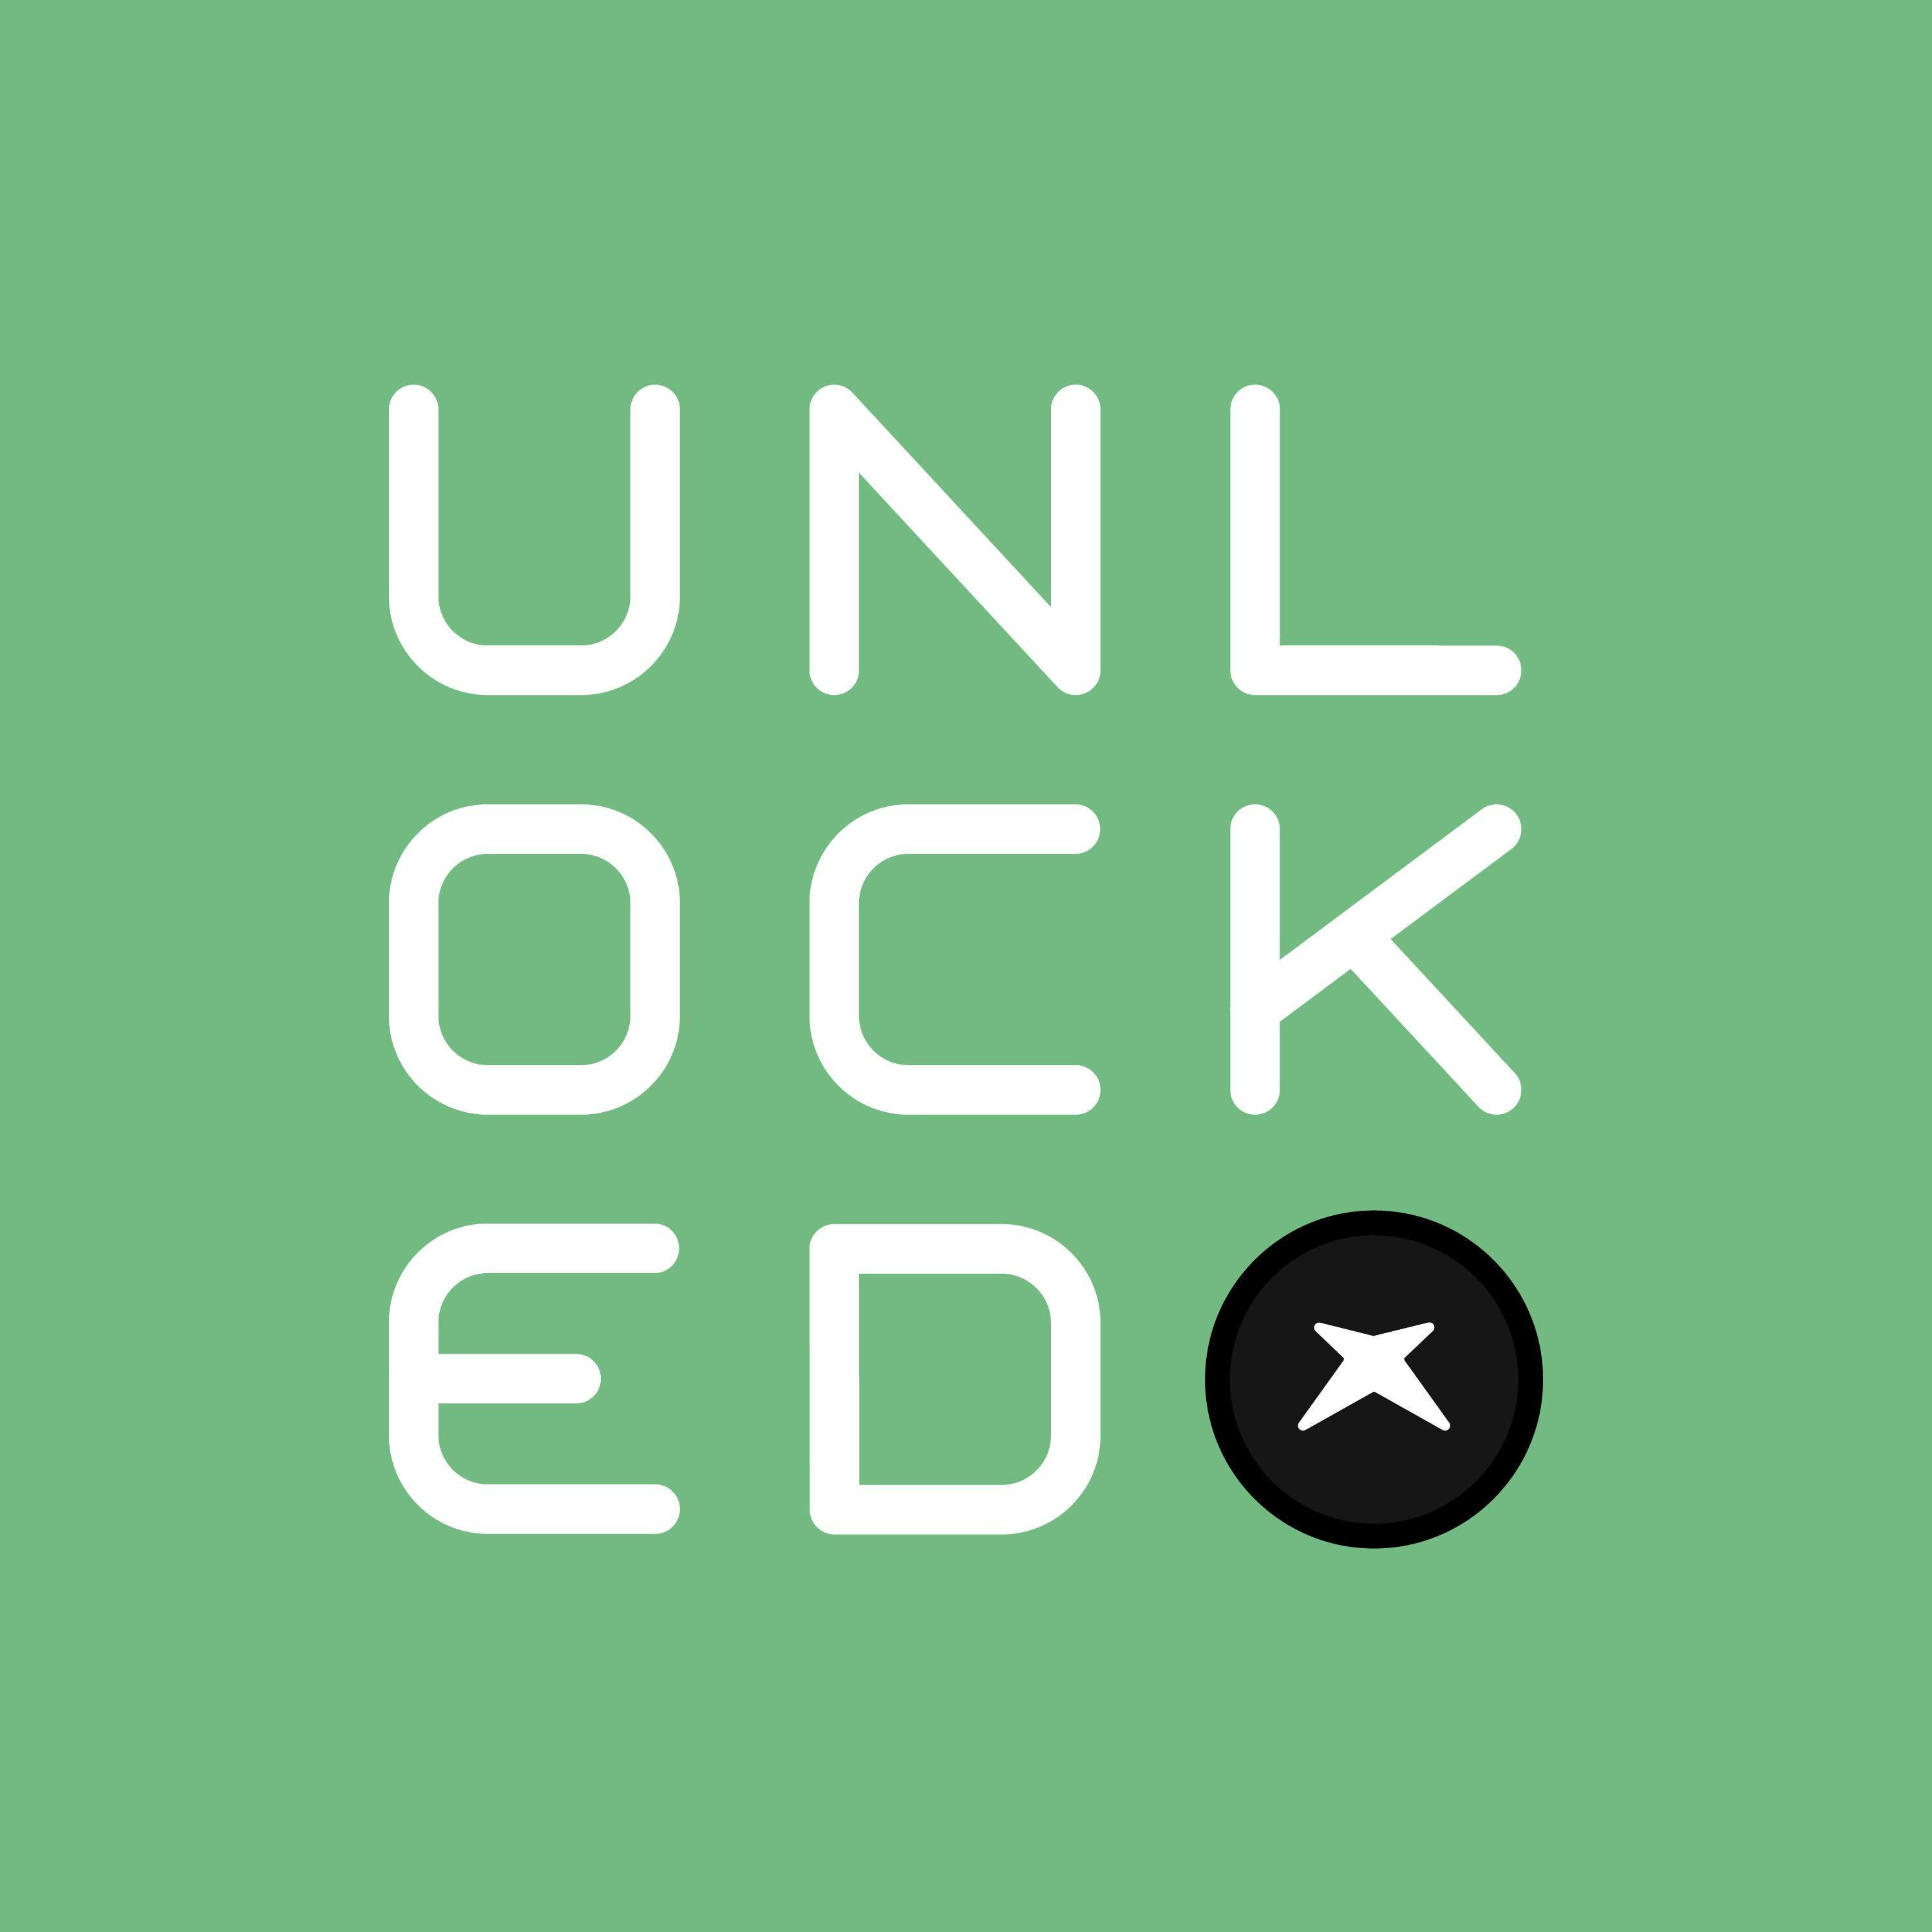 Podcast Unlocked Episode 265: The Futures of Rocksteady and Gears of War